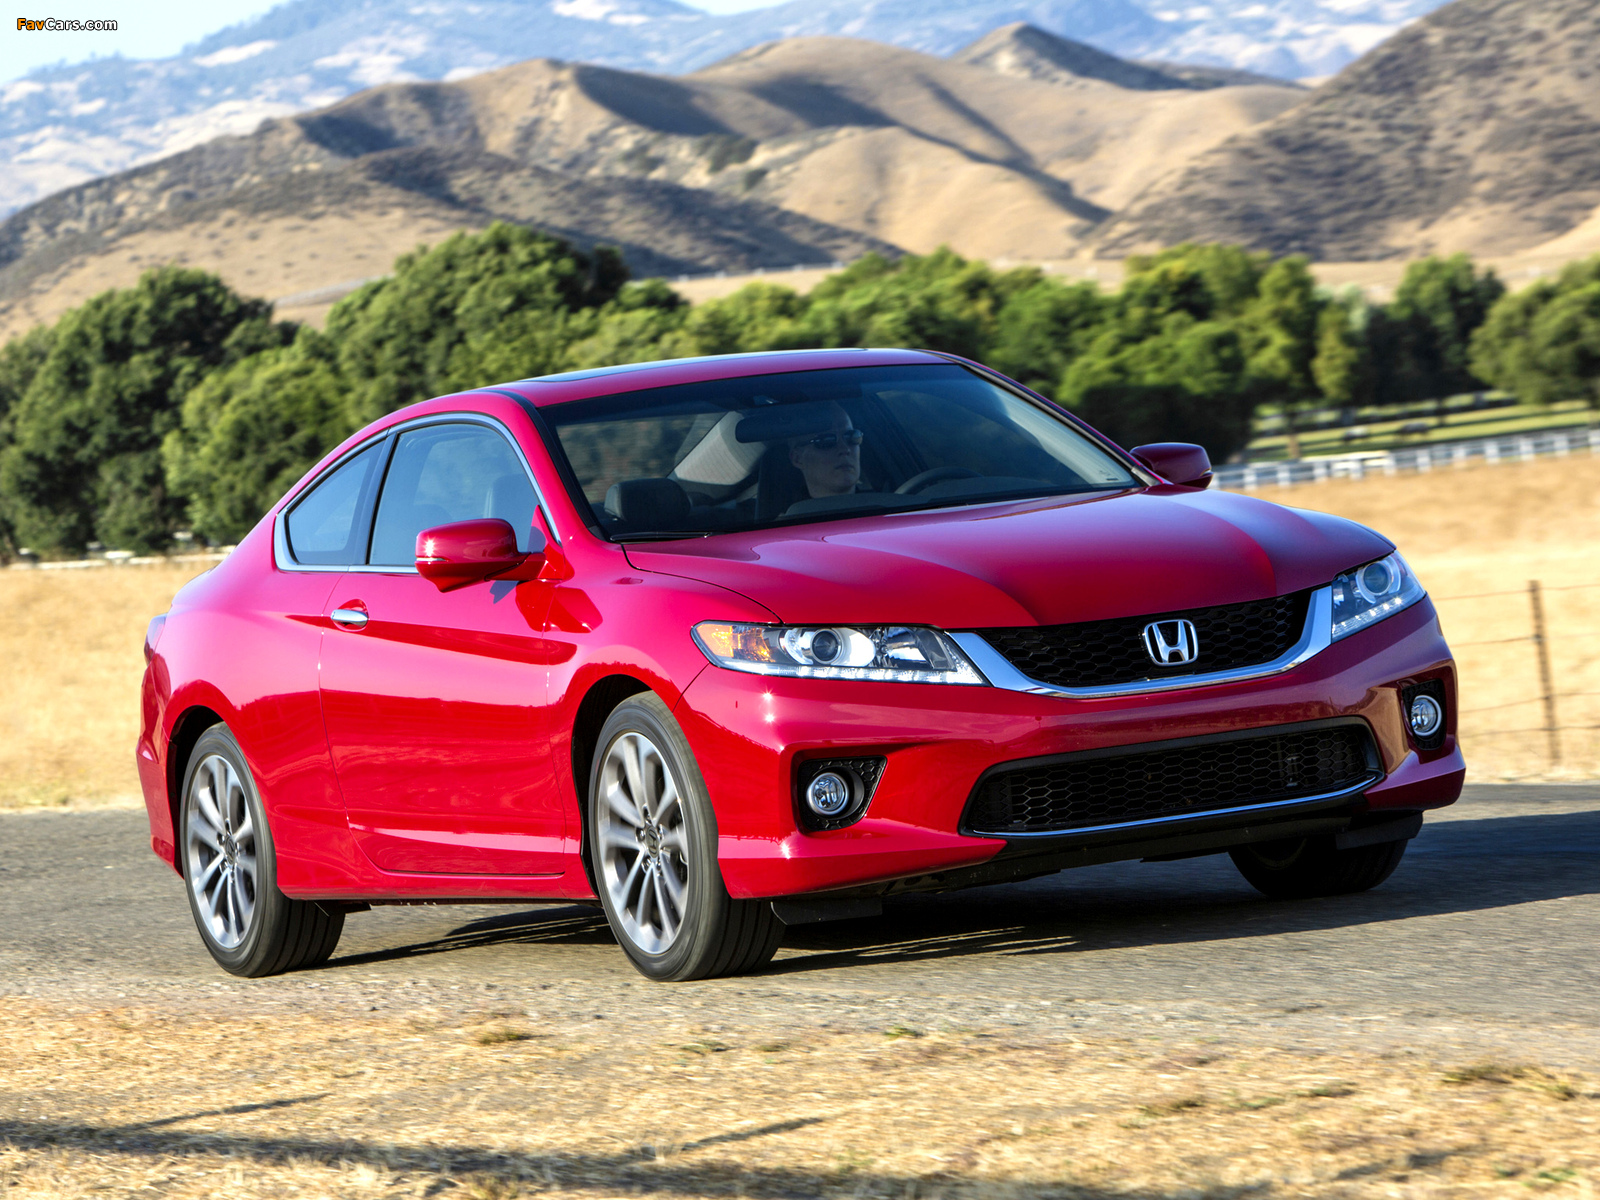 Honda Accord EX-L V6 Coupe 2012 pictures (1600 x 1200)